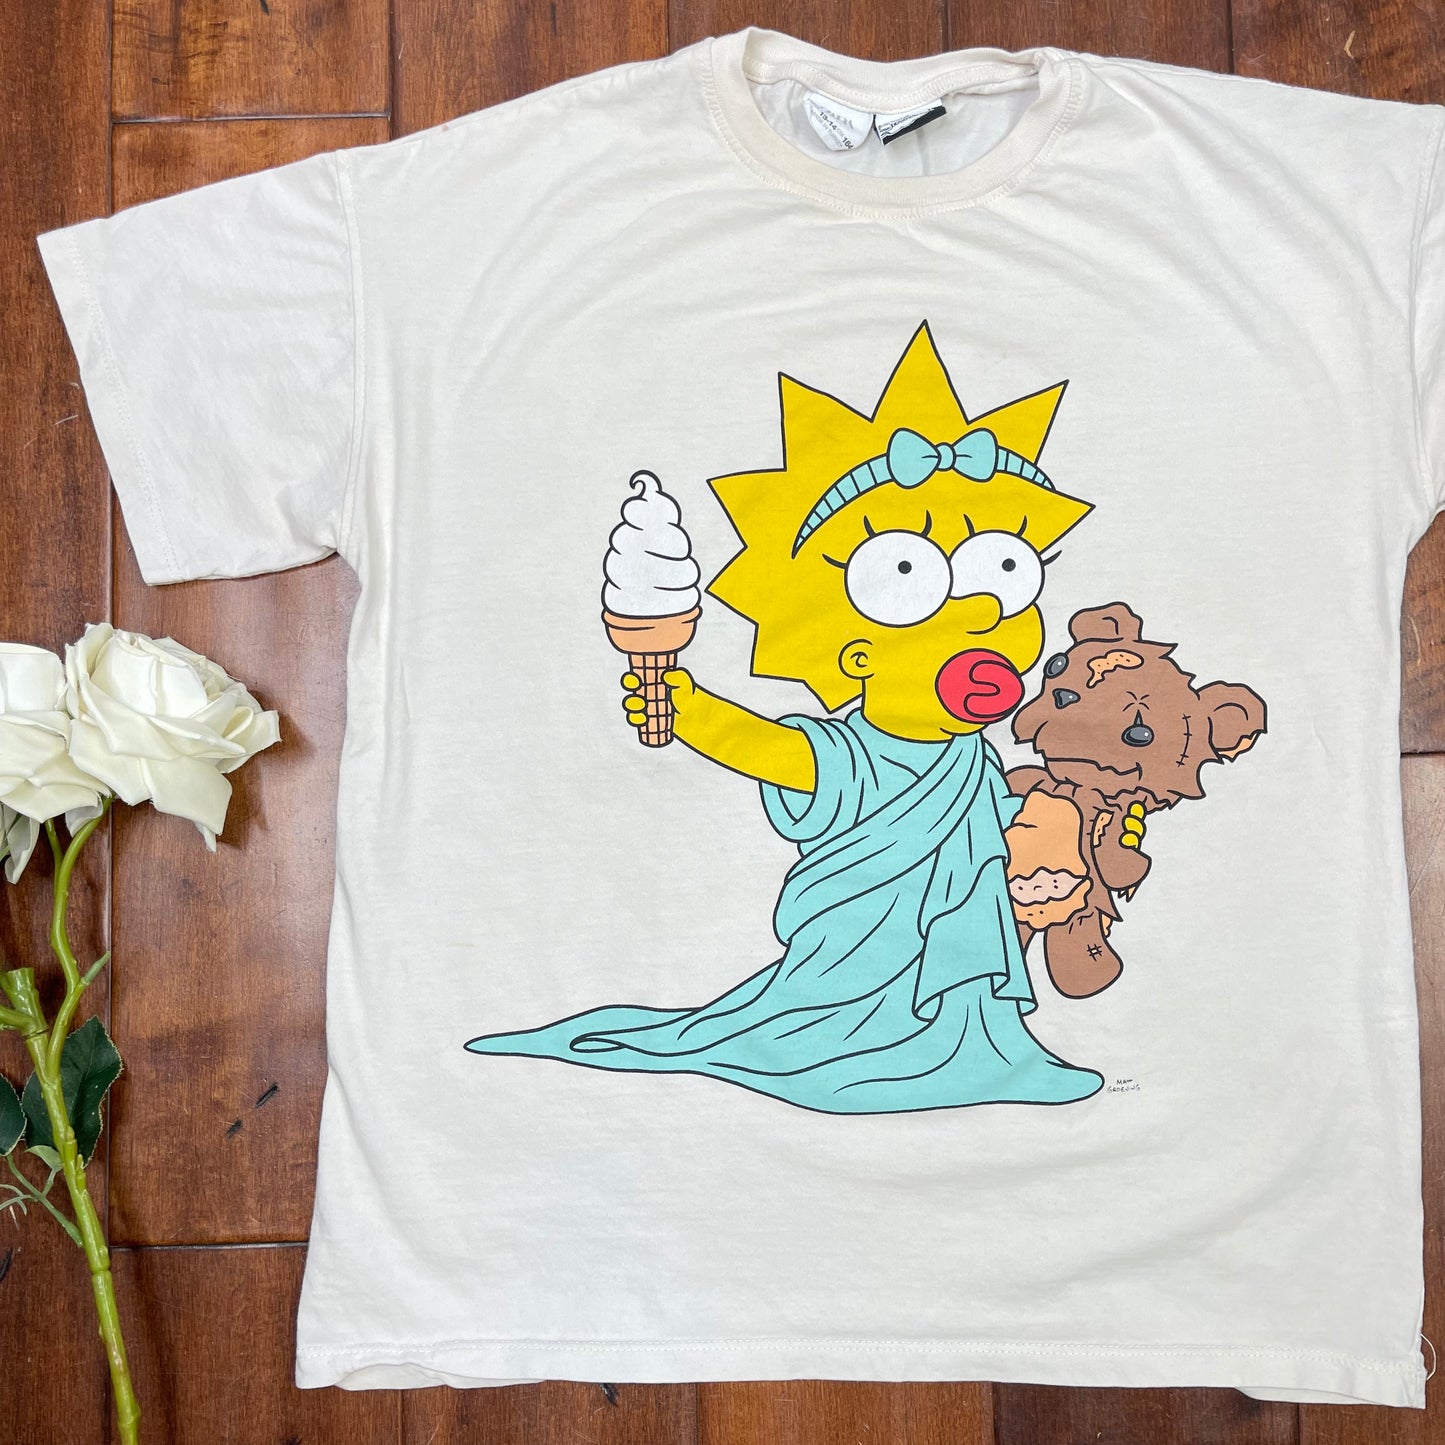 THRIFTED “THE SIMPSONS” TEE